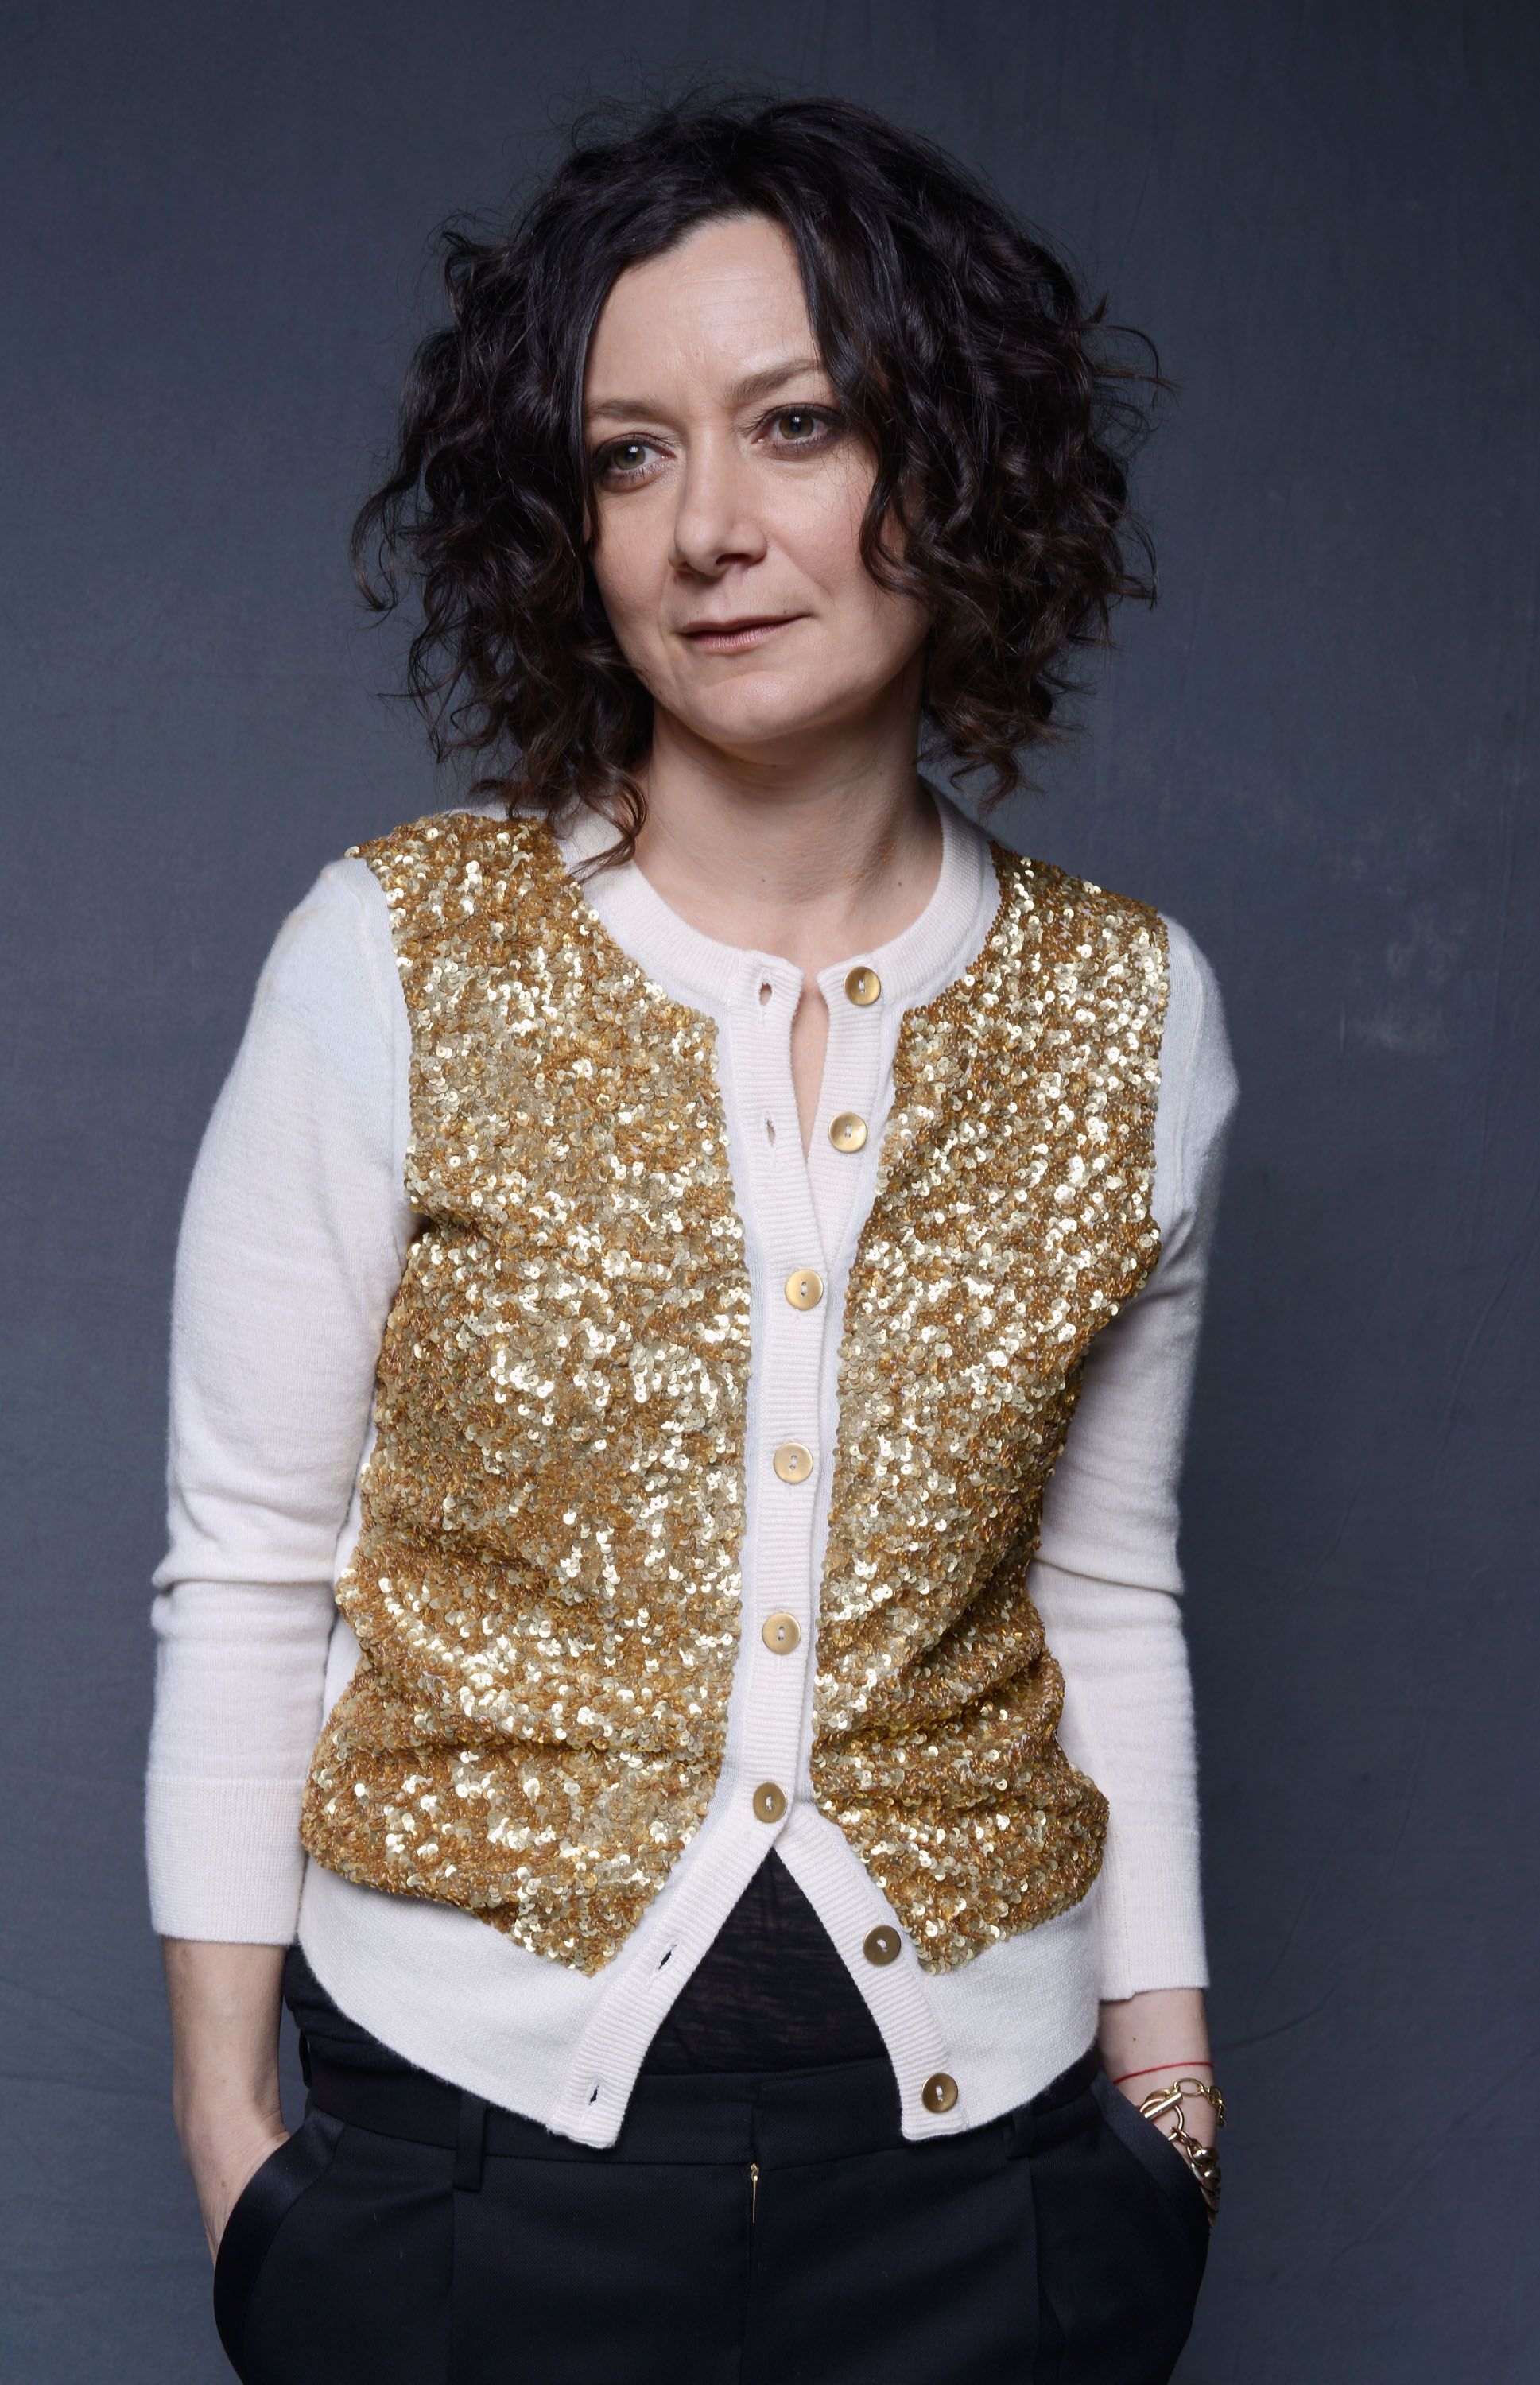 Sara Gilbert during The Art of Elysium's 7th Annual HEAVEN Gala presented by Mercedes-Benz at Skirball Cultural Center on January 11, 2014 in Los Angeles, California. | Source: Getty Images